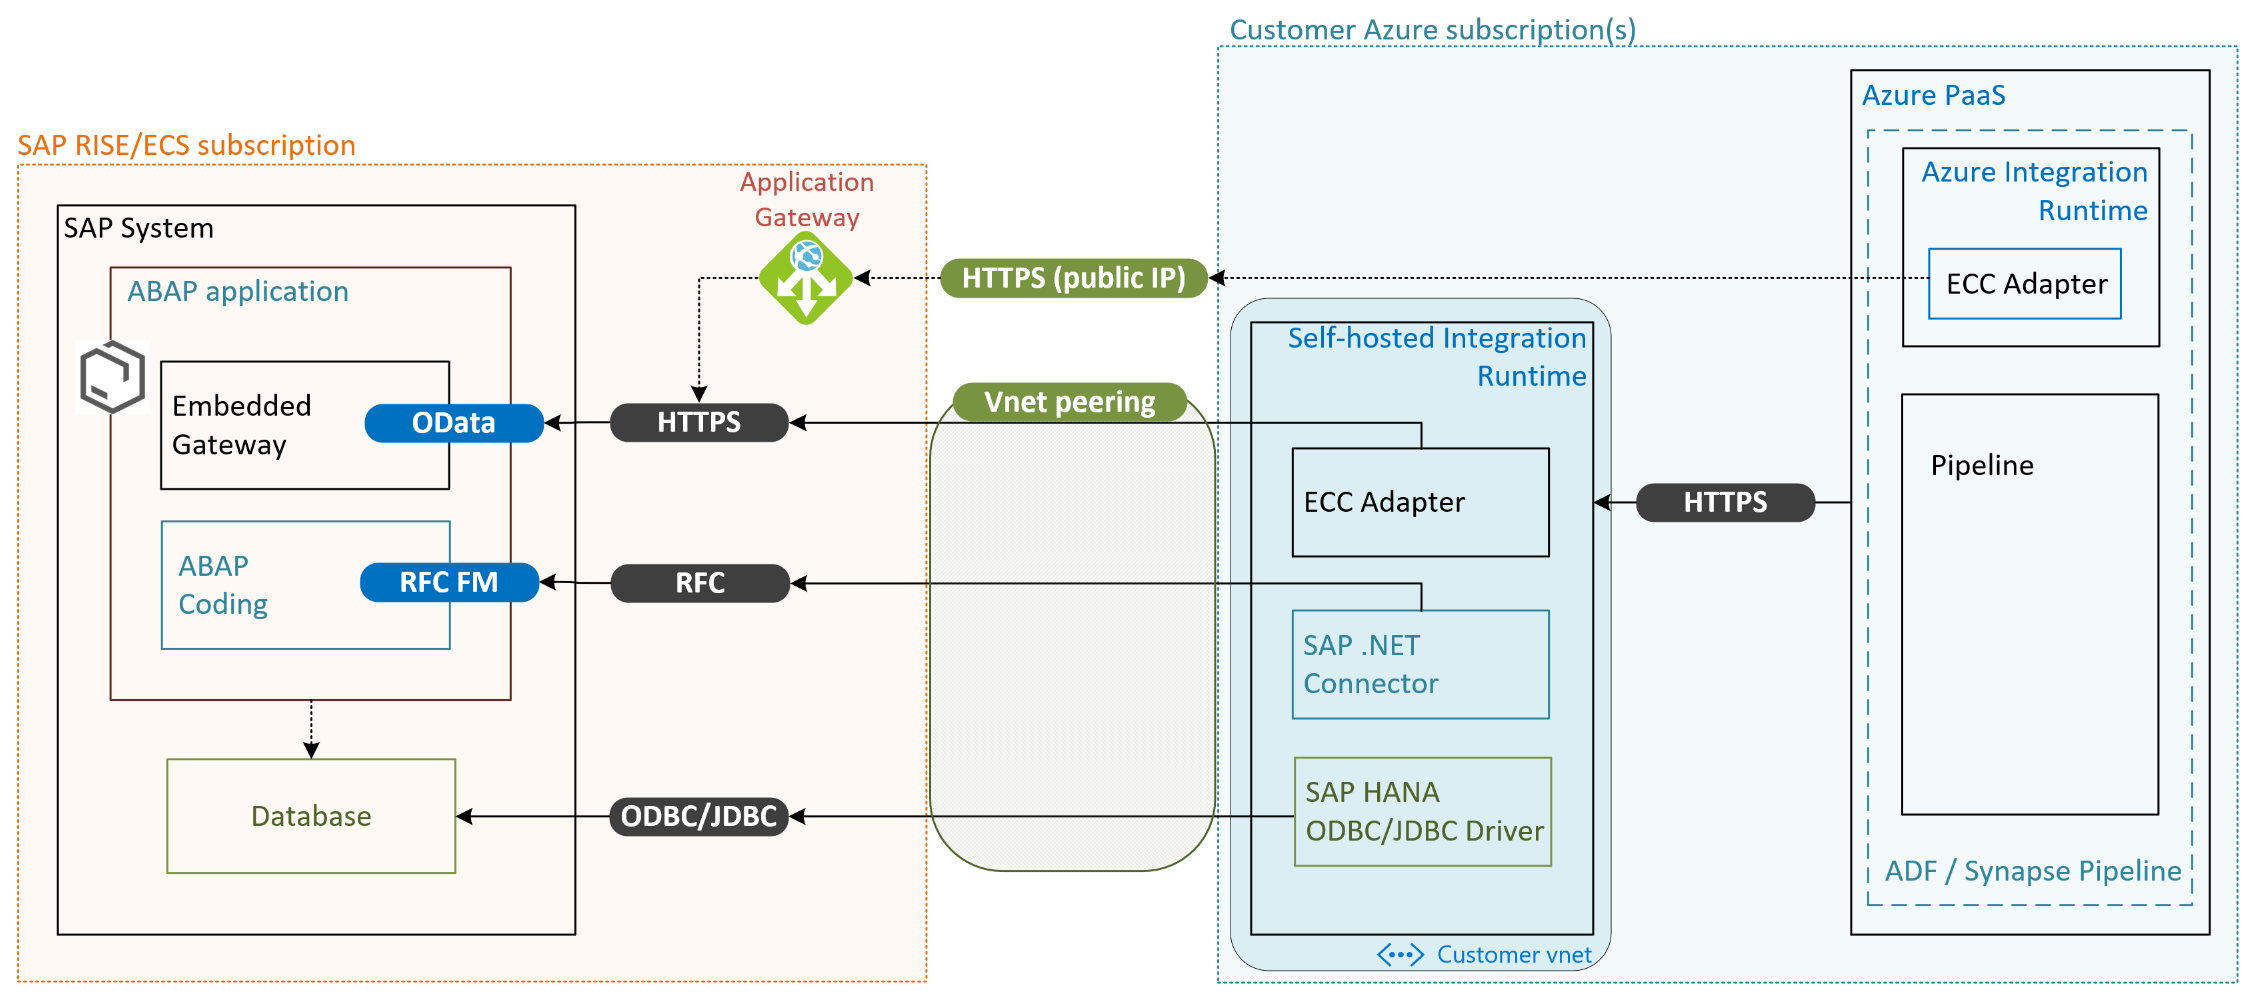 SAP RISE/ECS accessed by Azure ADF or Synapse.